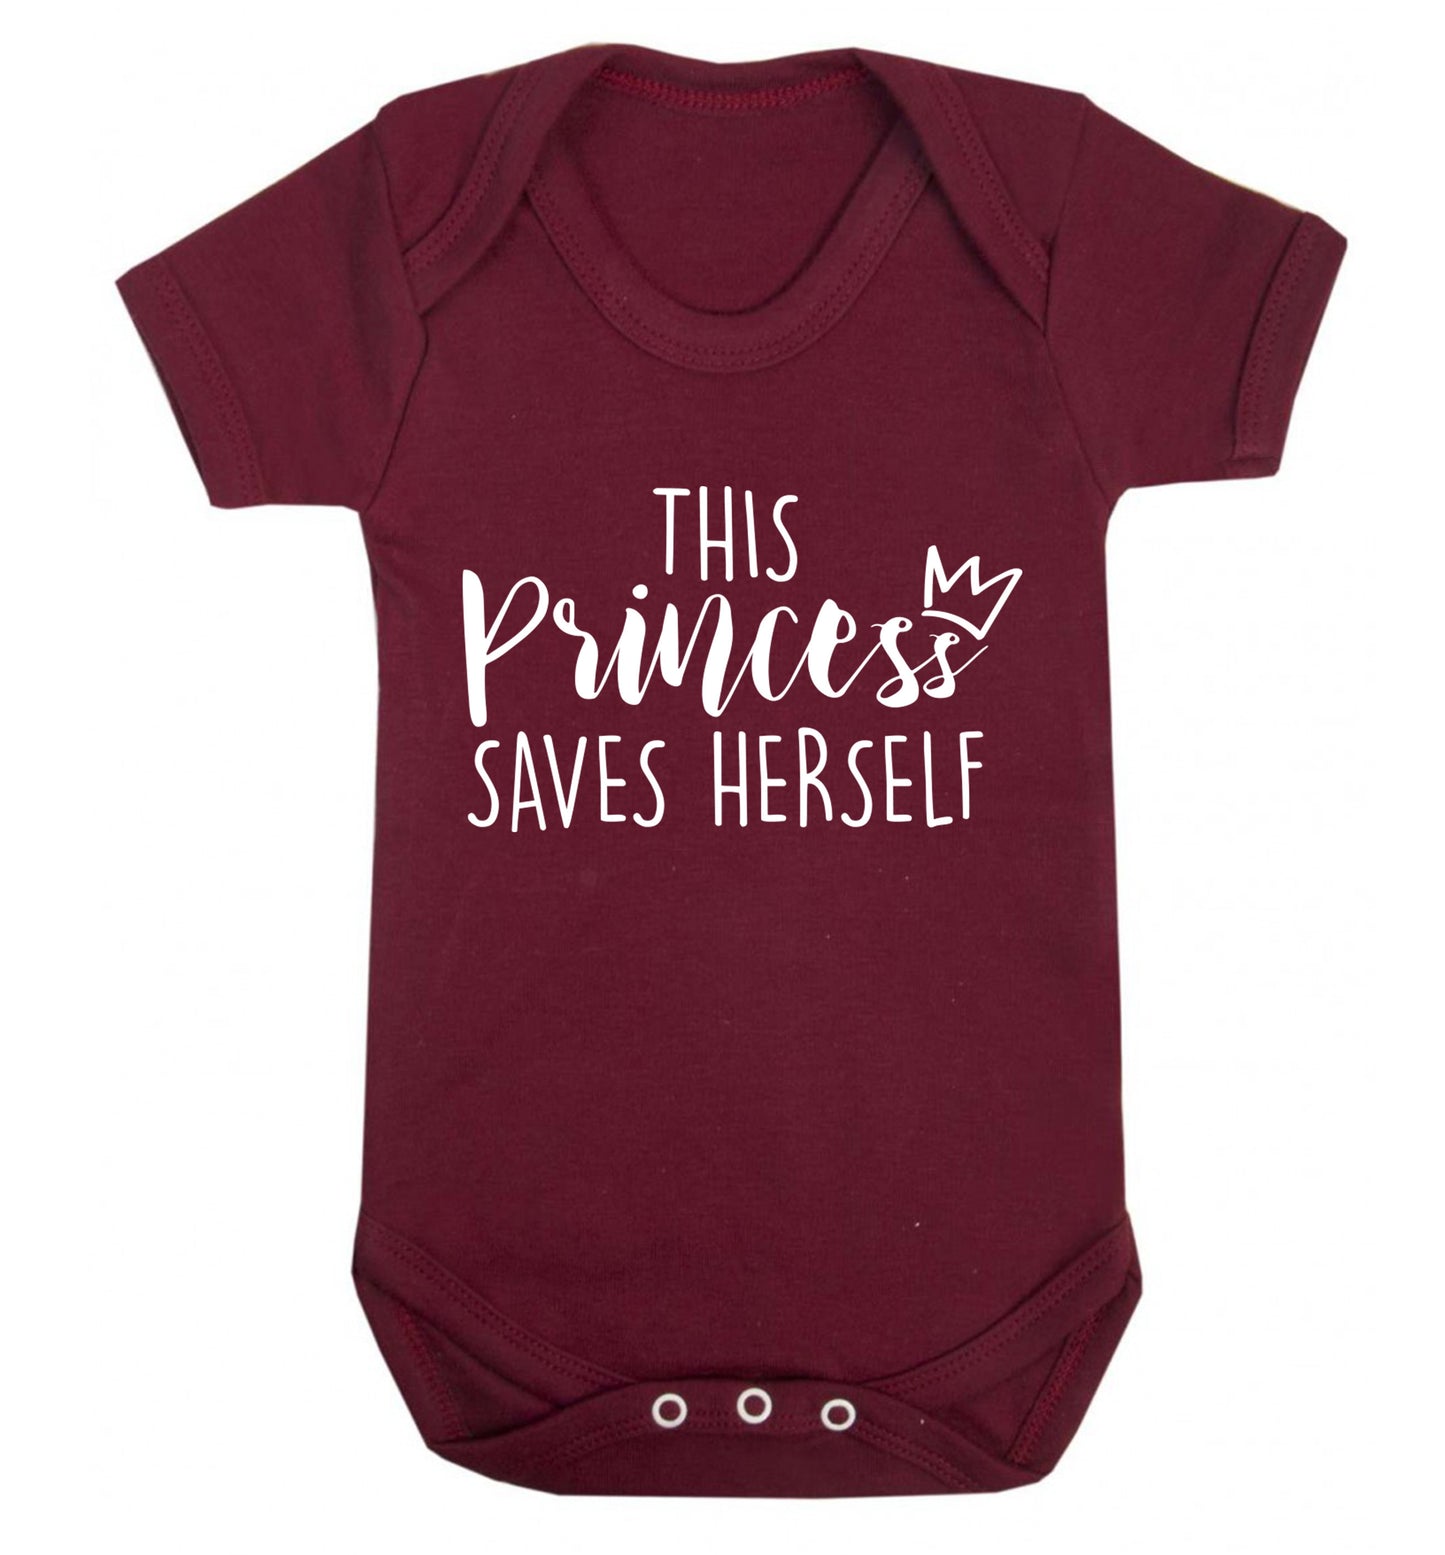 This princess saves herself Baby Vest maroon 18-24 months